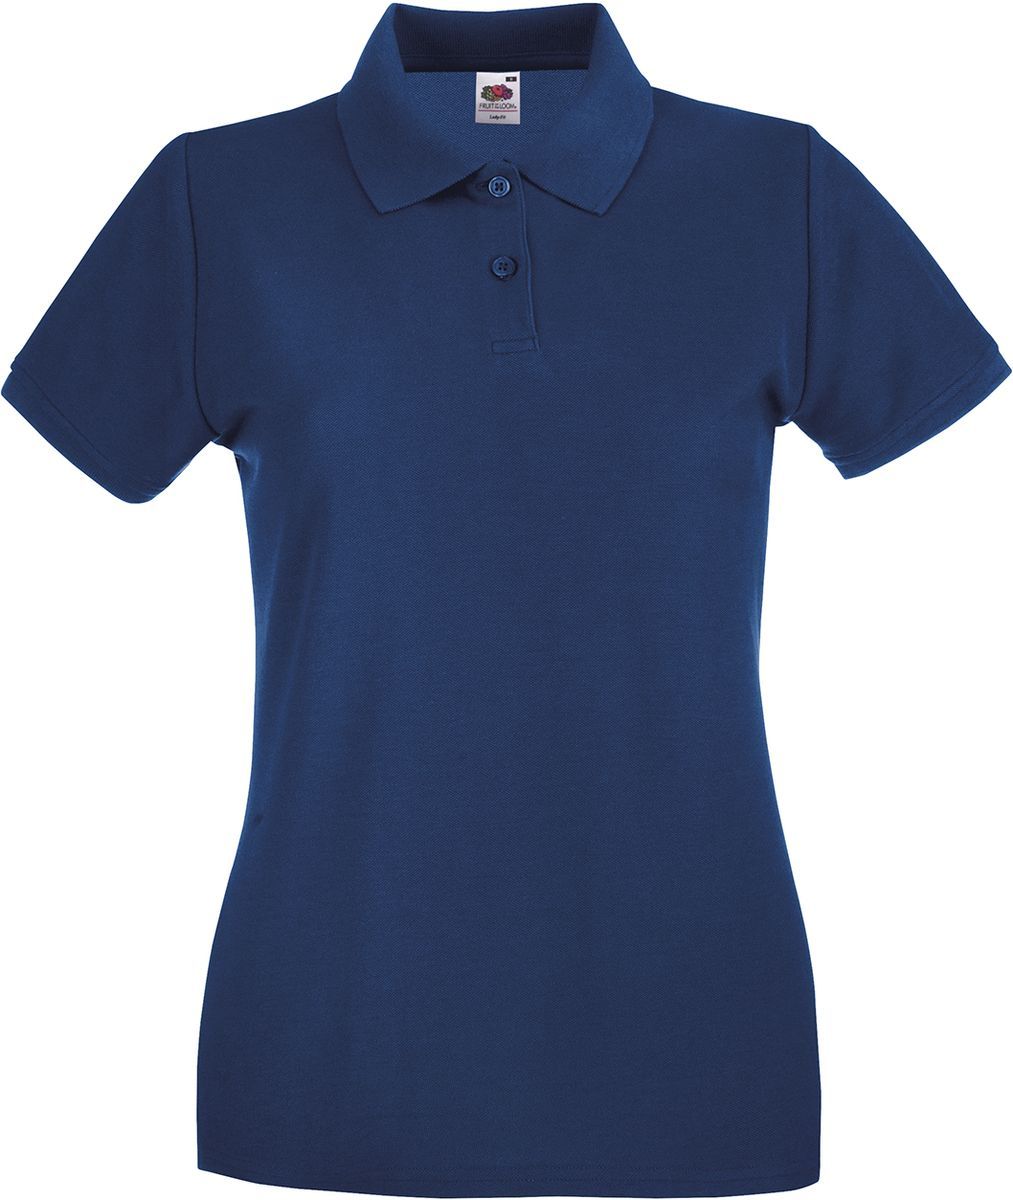 Lady-Fit Premium Polo Fruit of the Loom 63-030-0 Navy